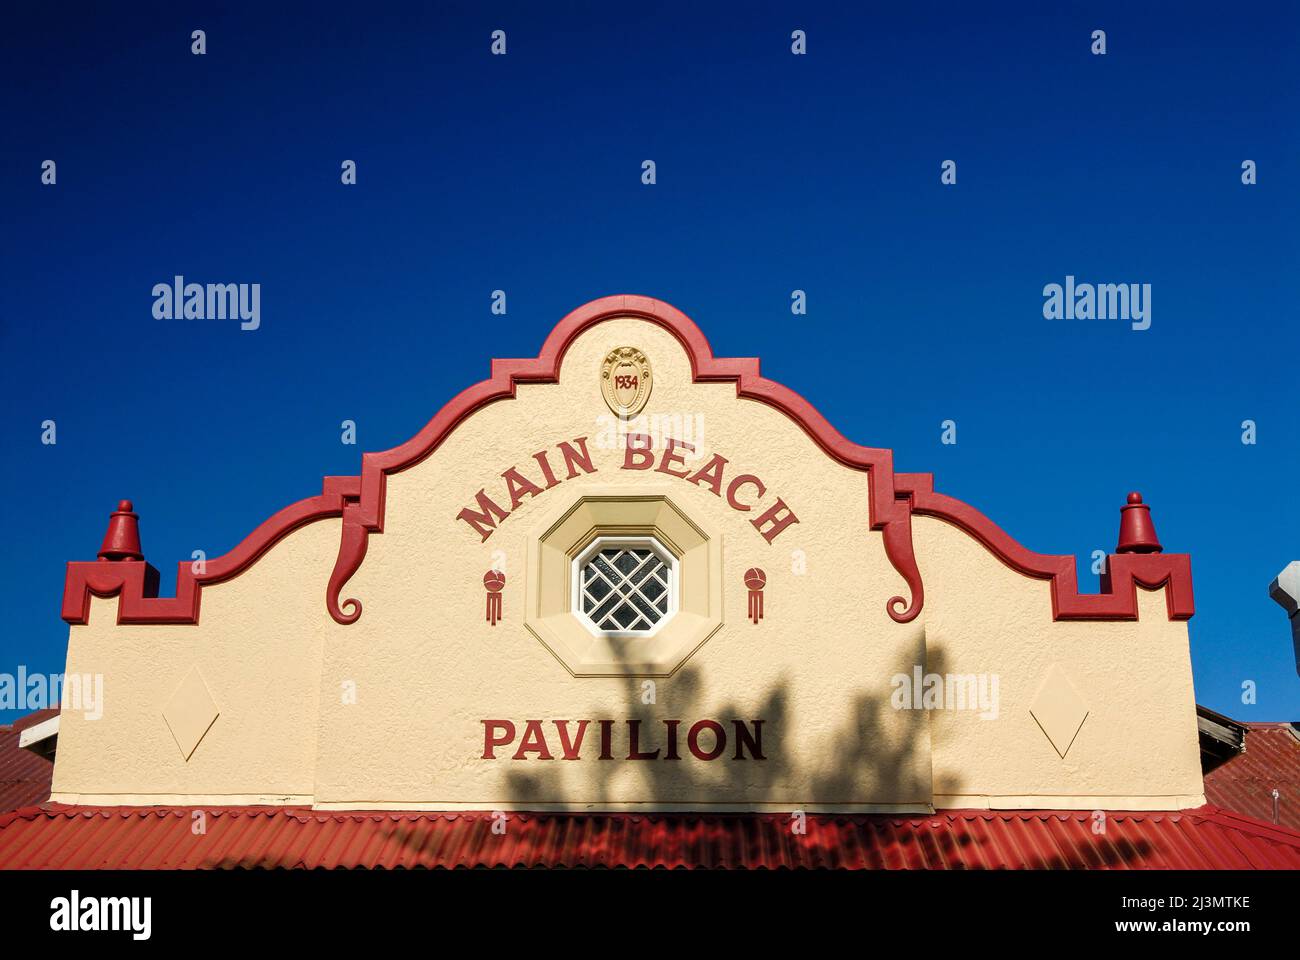 Main Beach's heritage listed bathing pavilion, built in 1934. Stock Photo